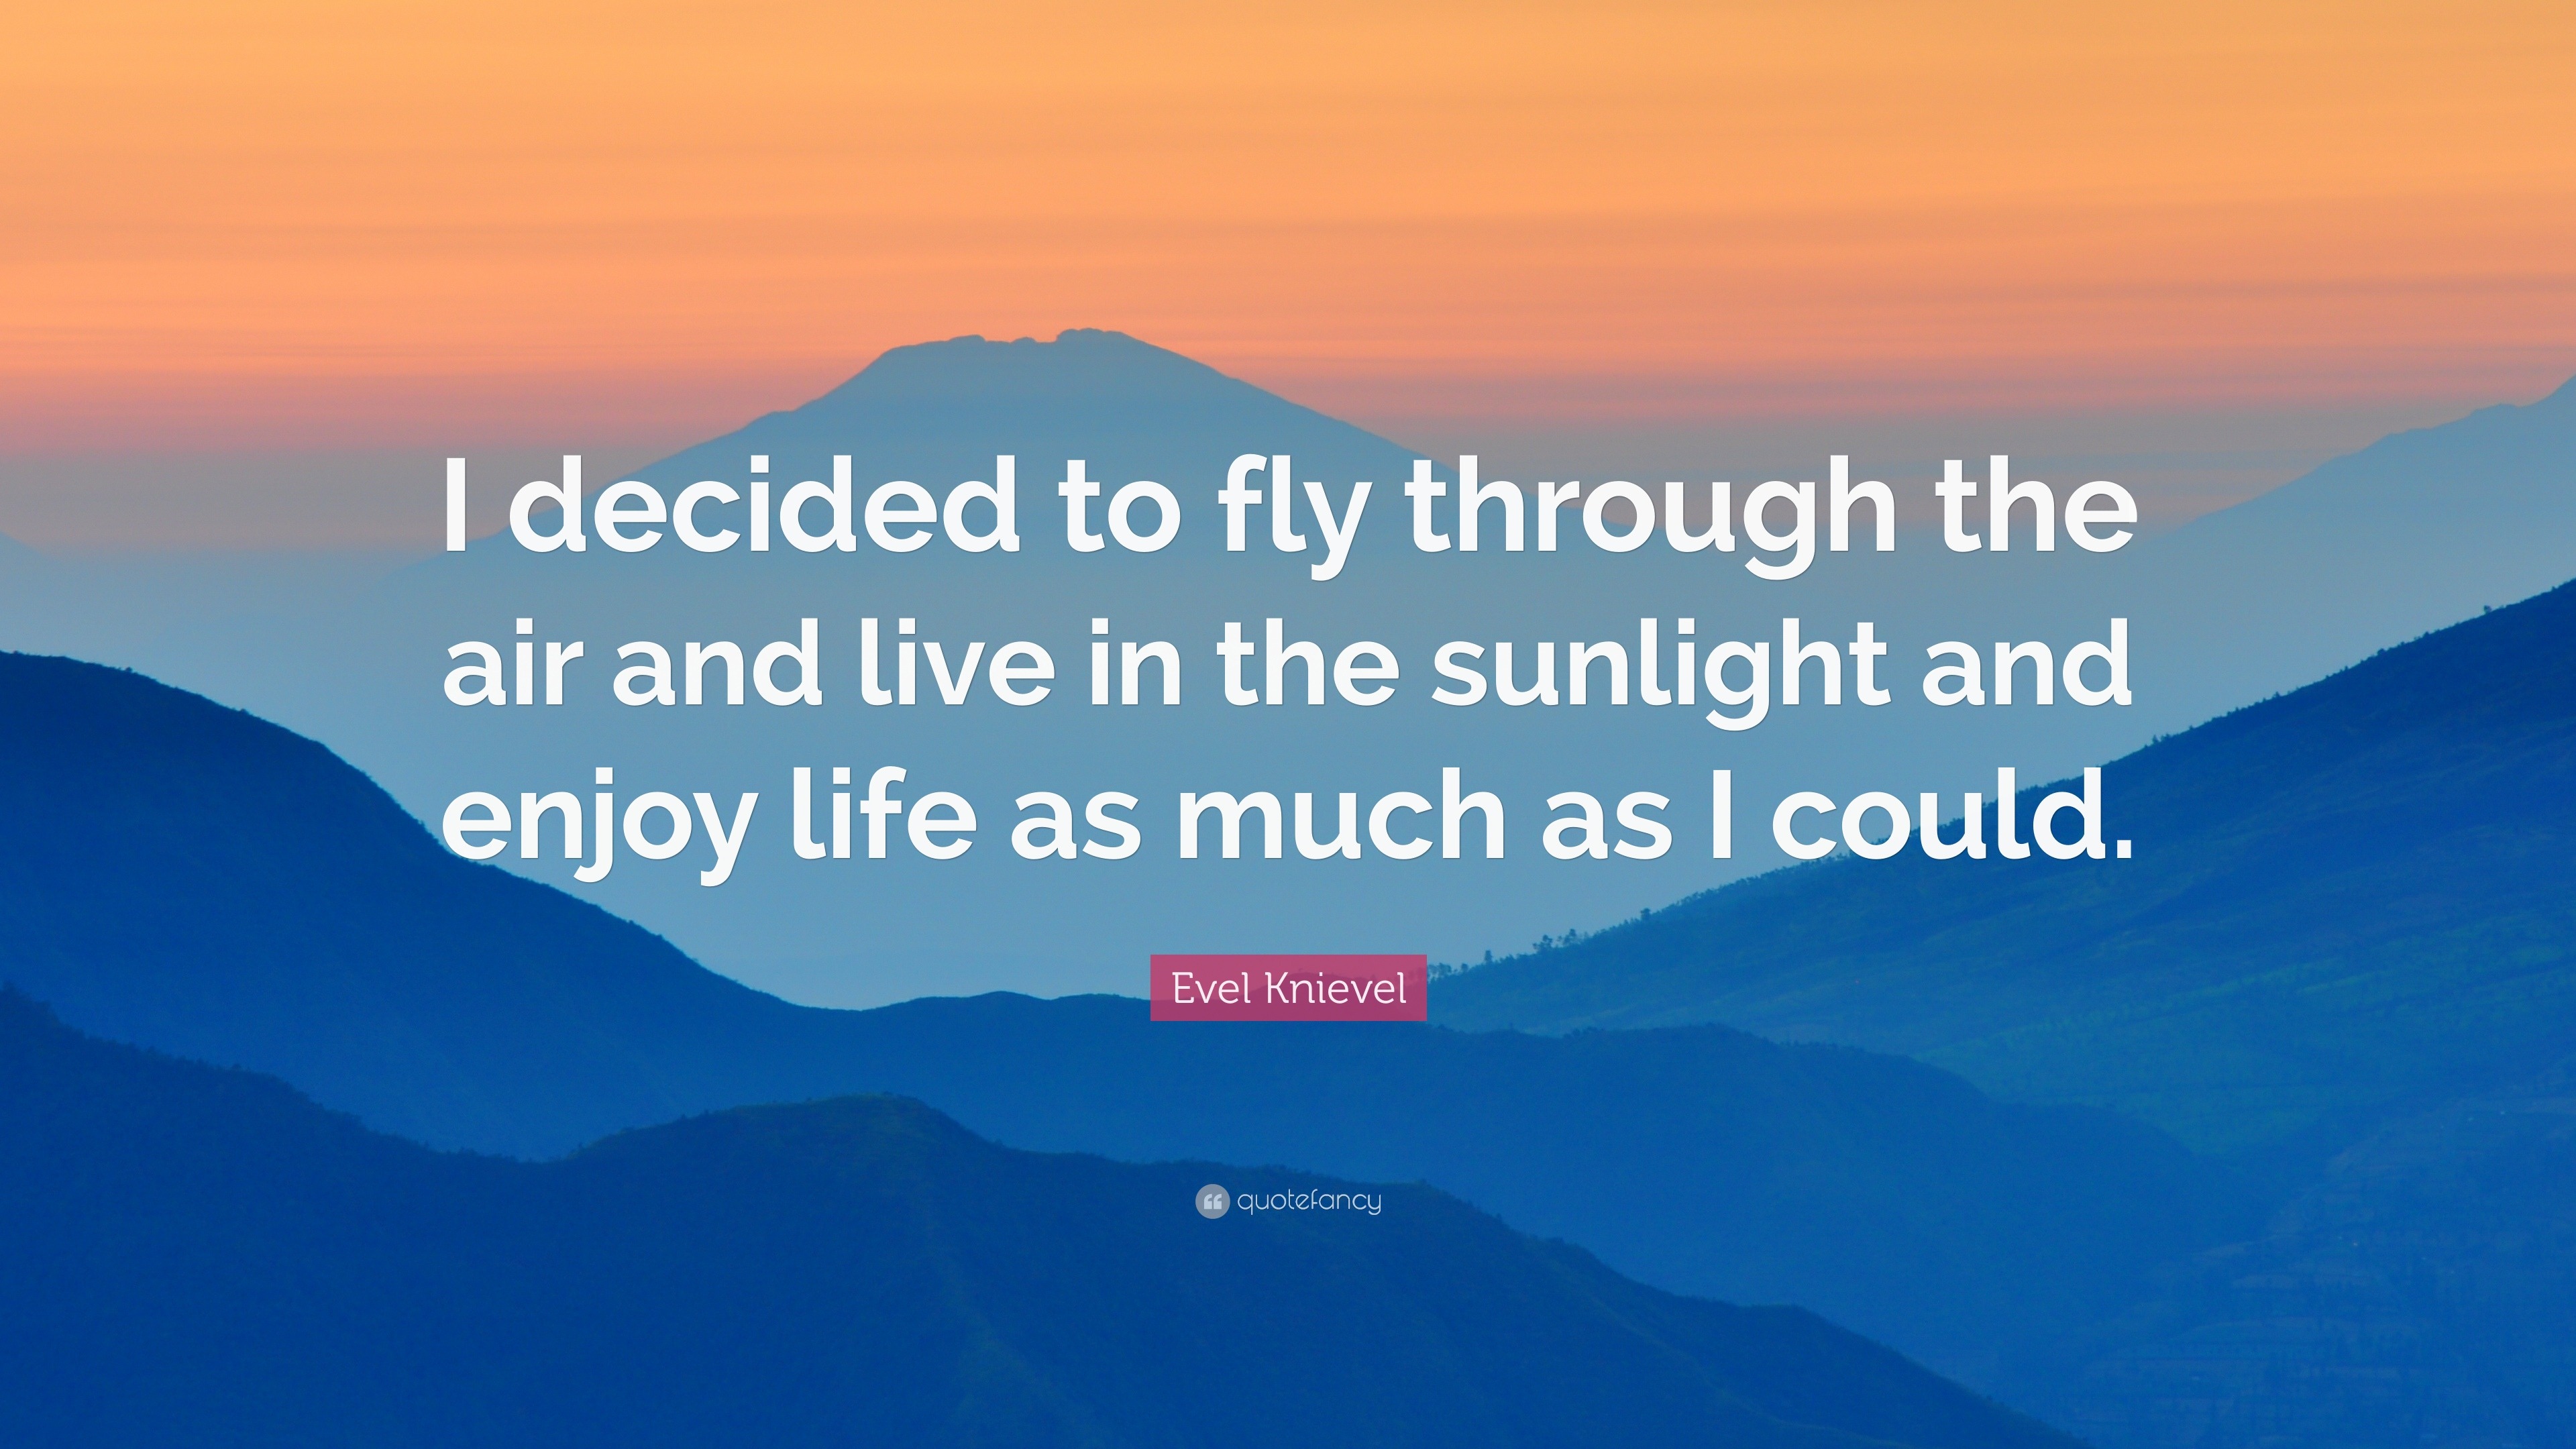 Evel Knievel Quote “I decided to fly through the air and live in the